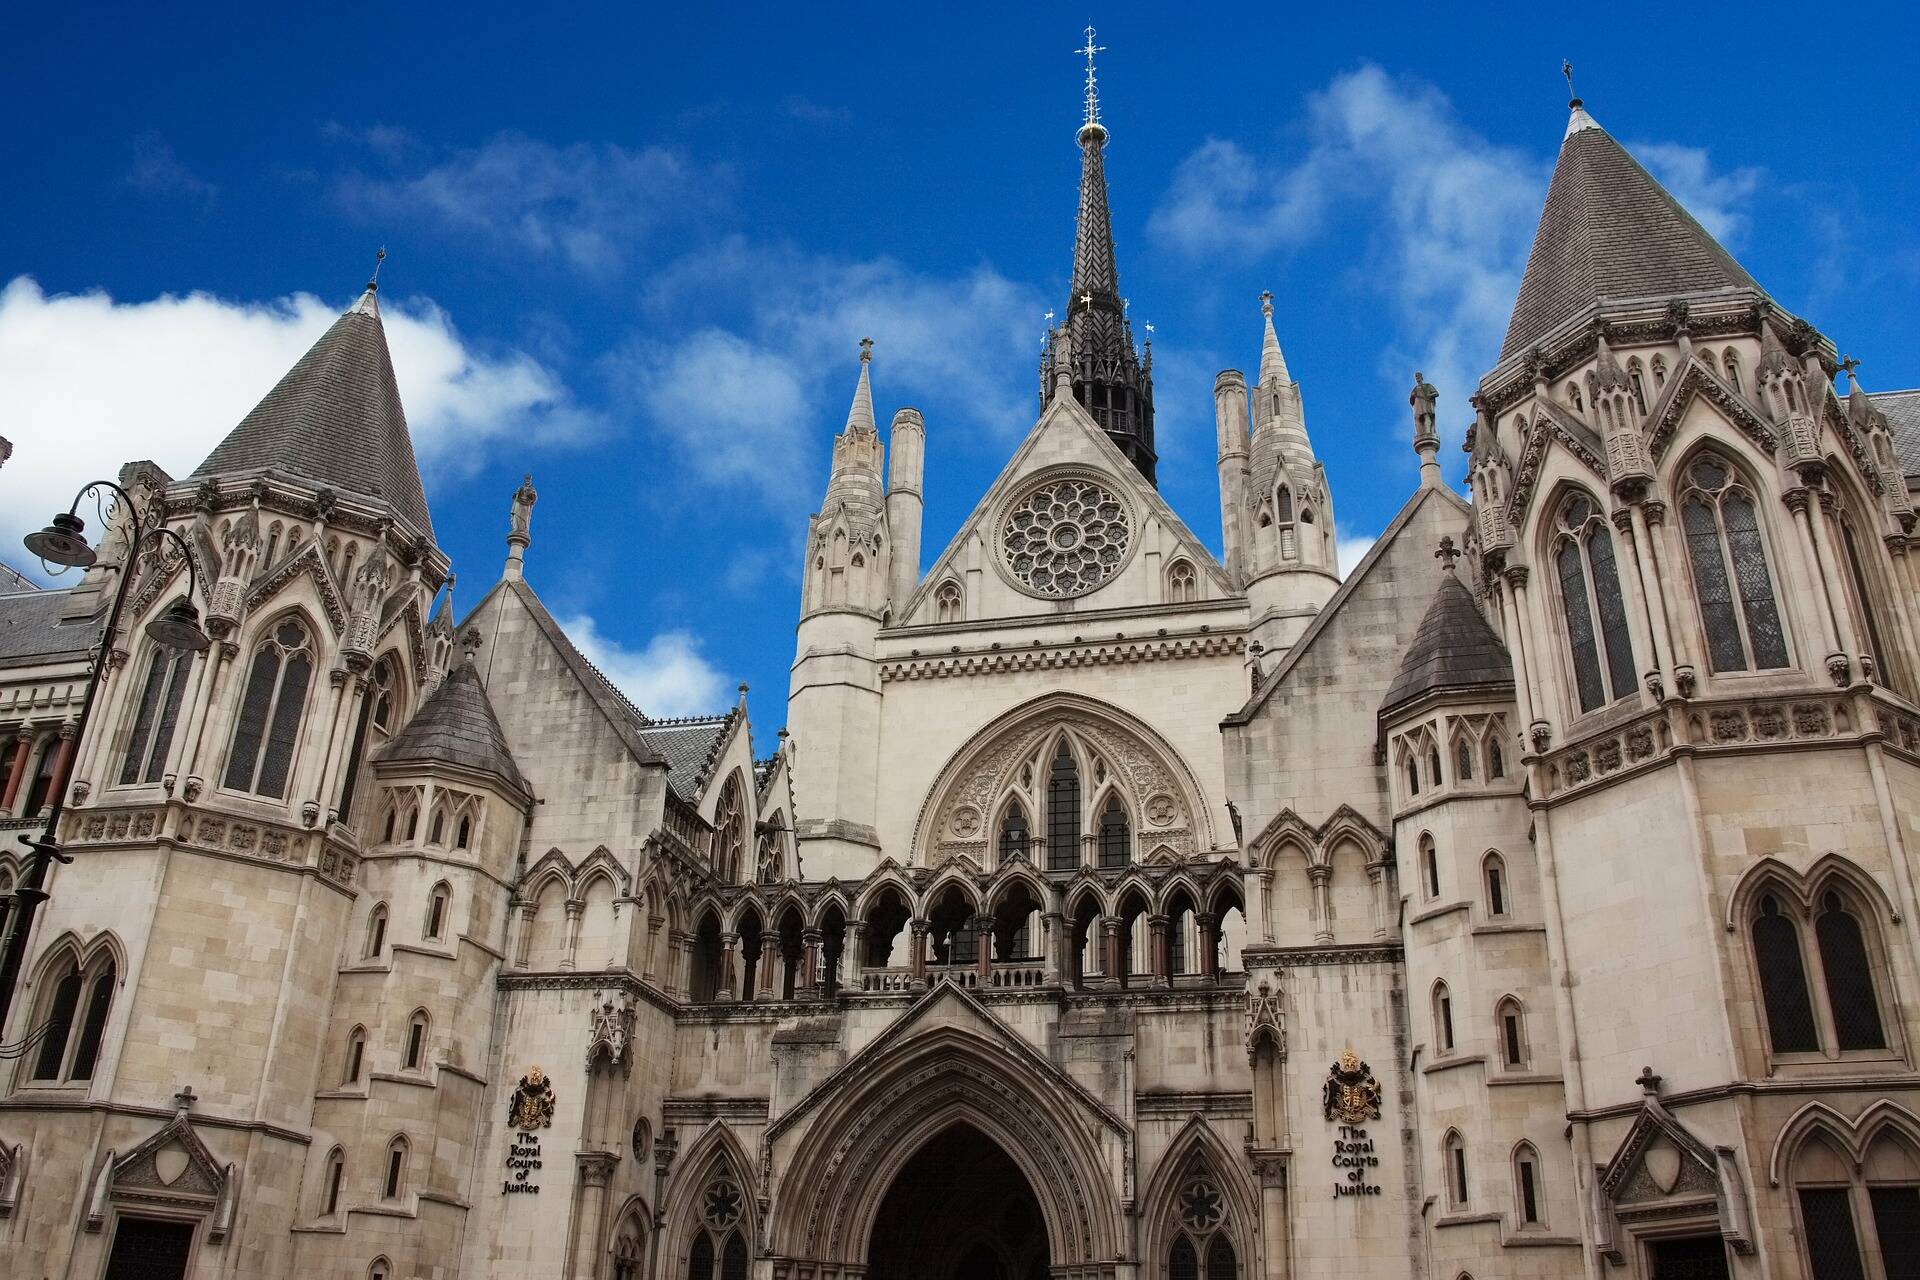 The front entrance to the Royal Courts of Justice building in London